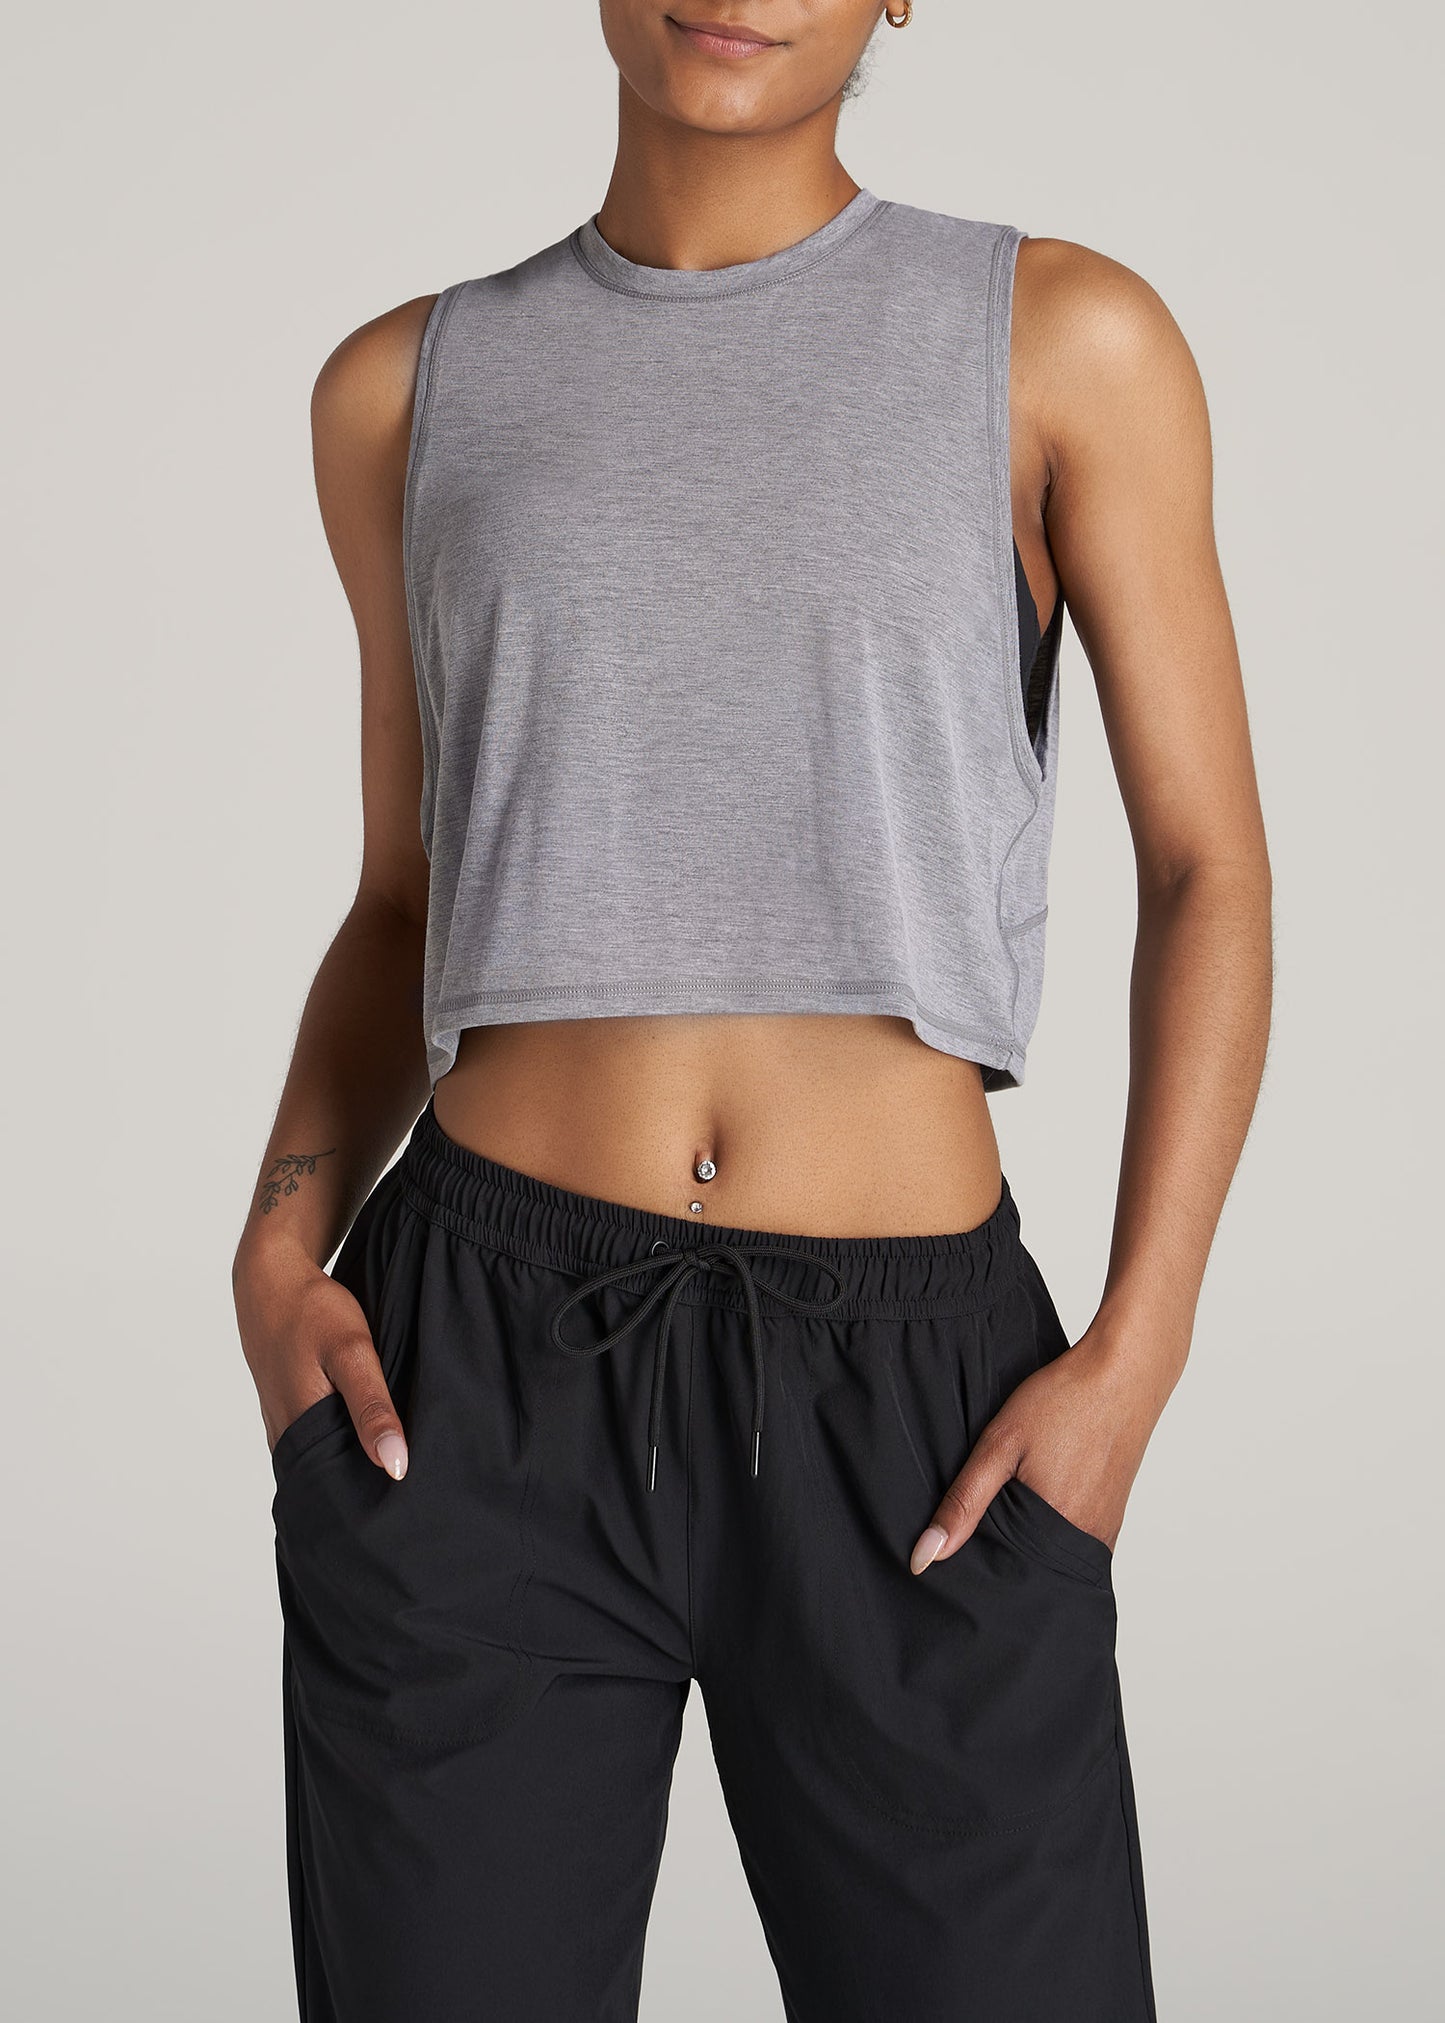 Women's Cropped Muscle Tank: Tall Cropped Muscle Tank Grey – American Tall